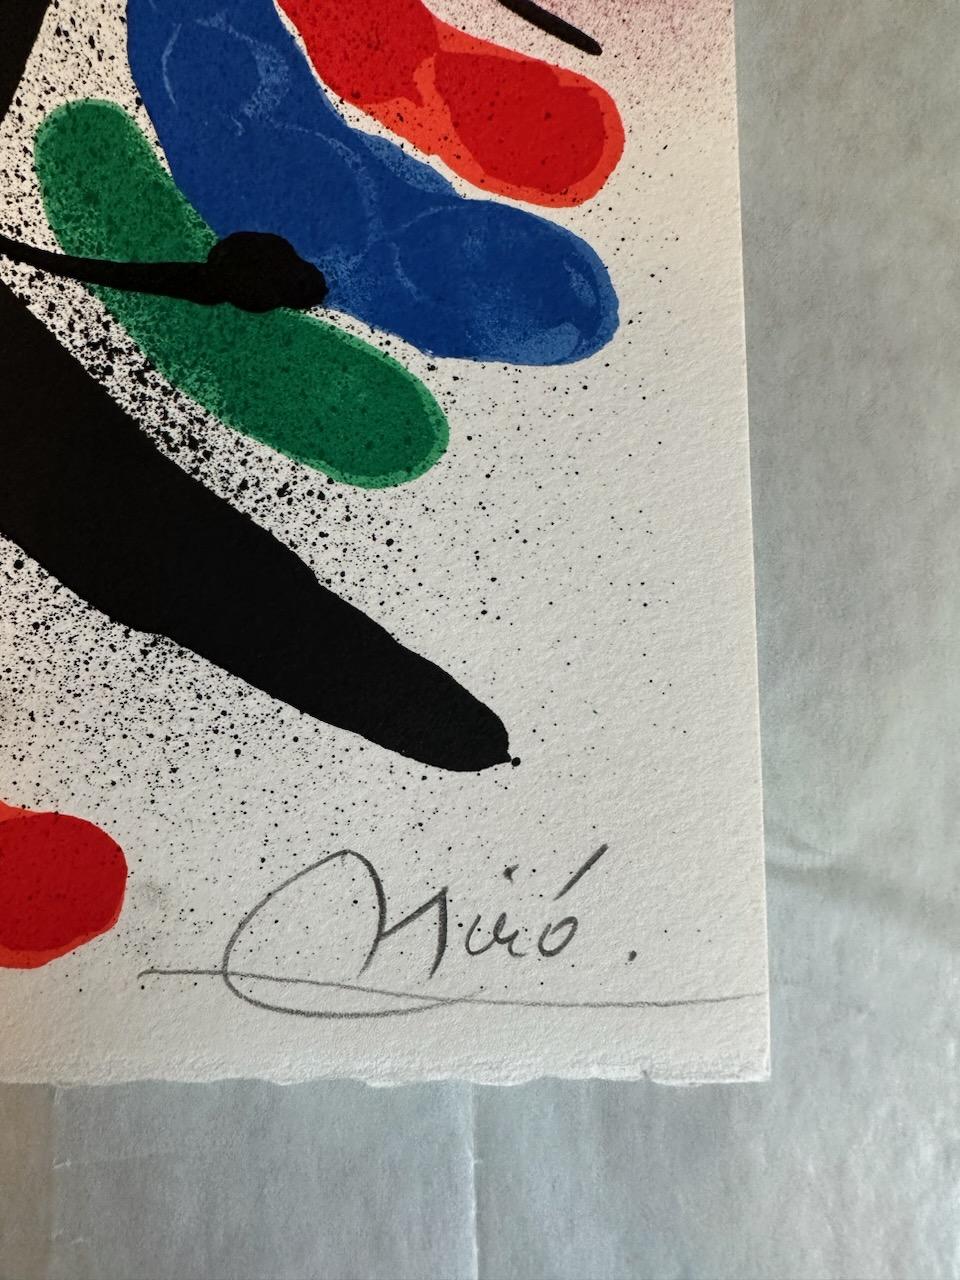 Miro Lithograph I Hand-Signed Limited Edition Lithograph - Print by Joan Miró